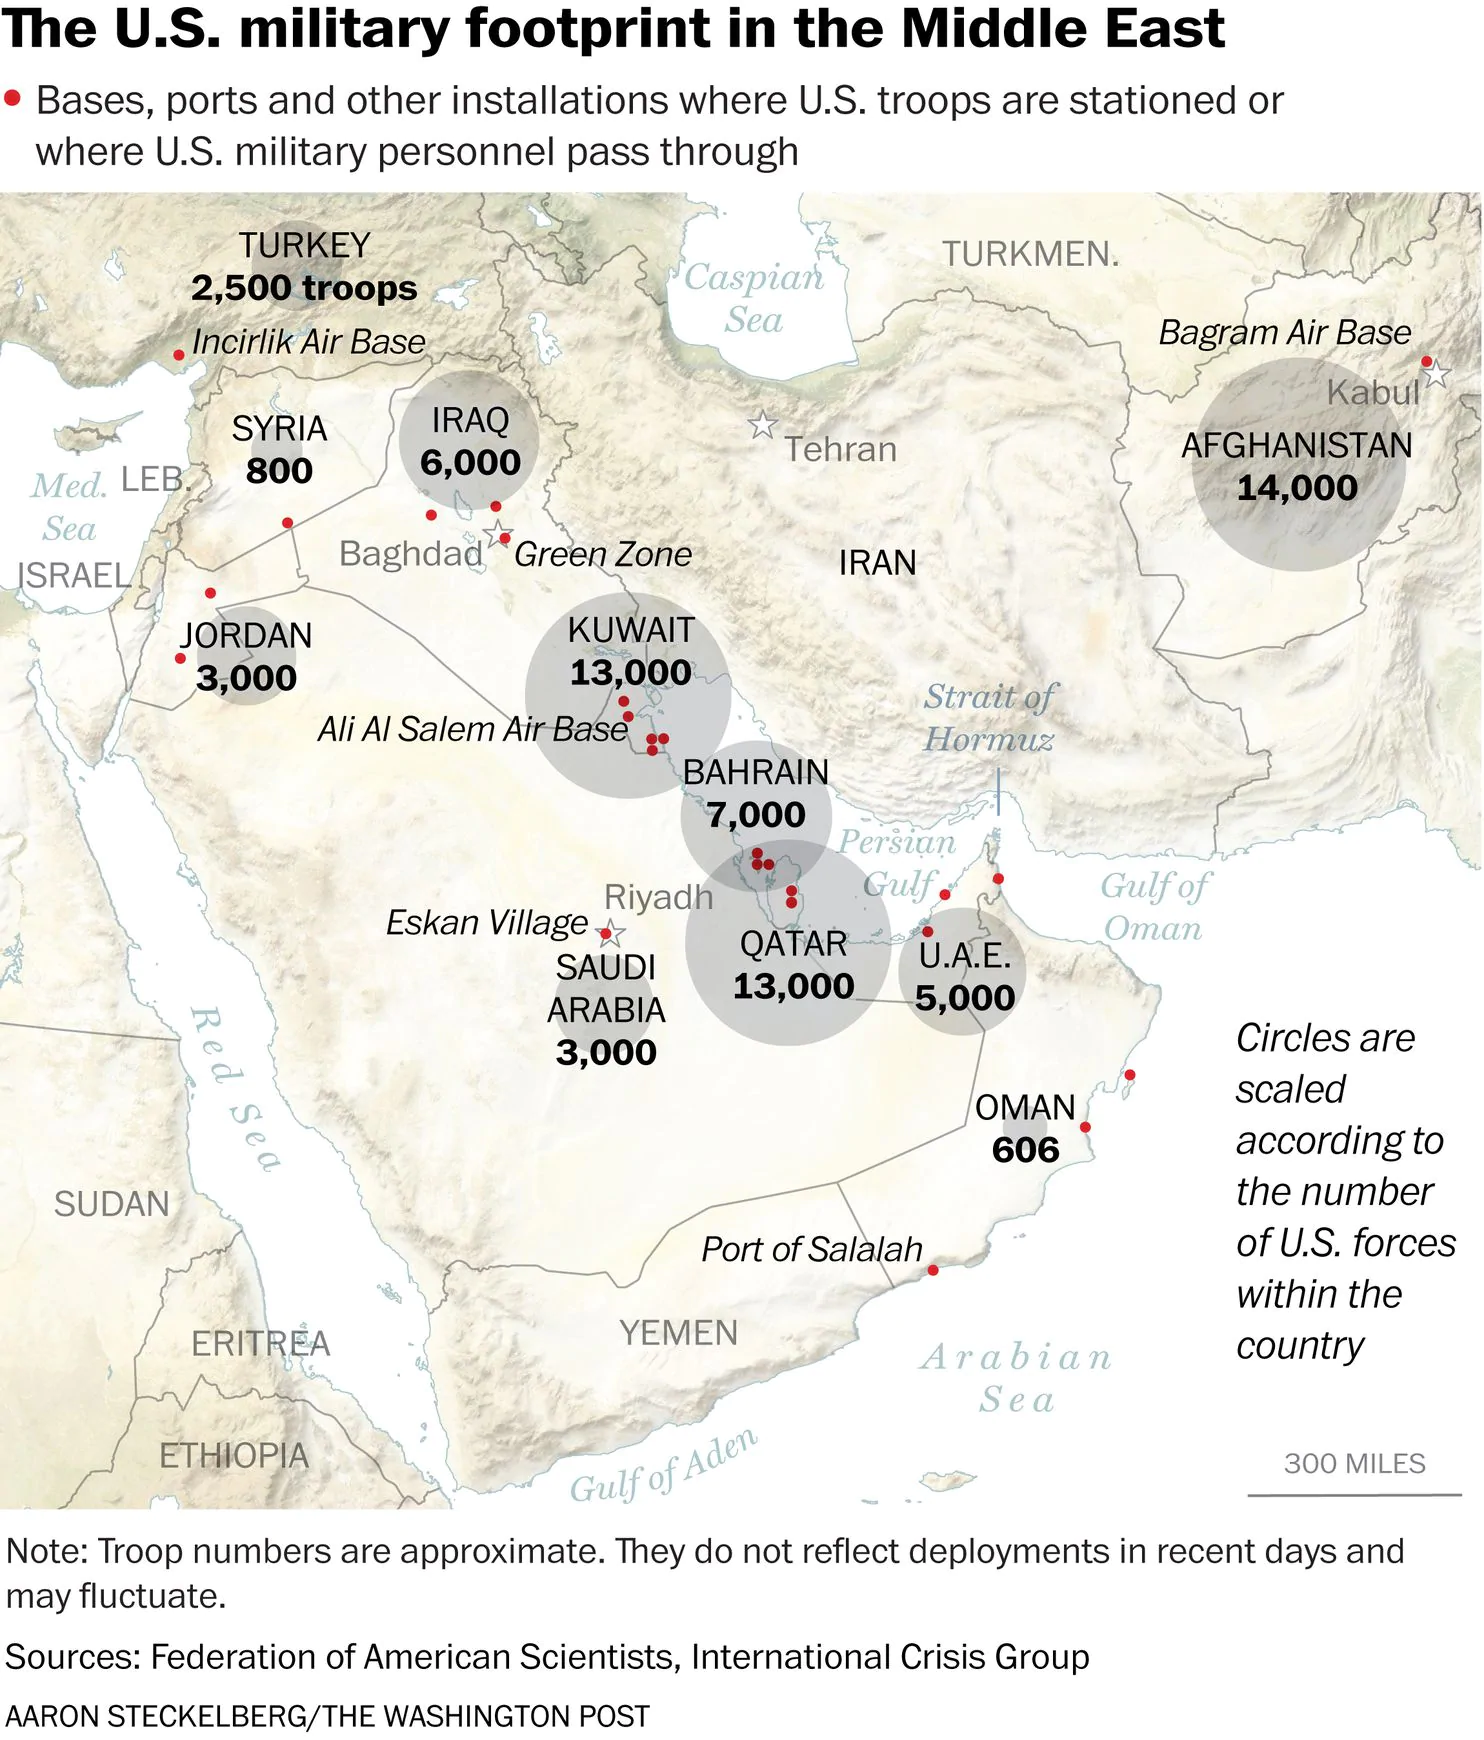 How Many Forces Does United States Have In Middle East To Strike Iran?